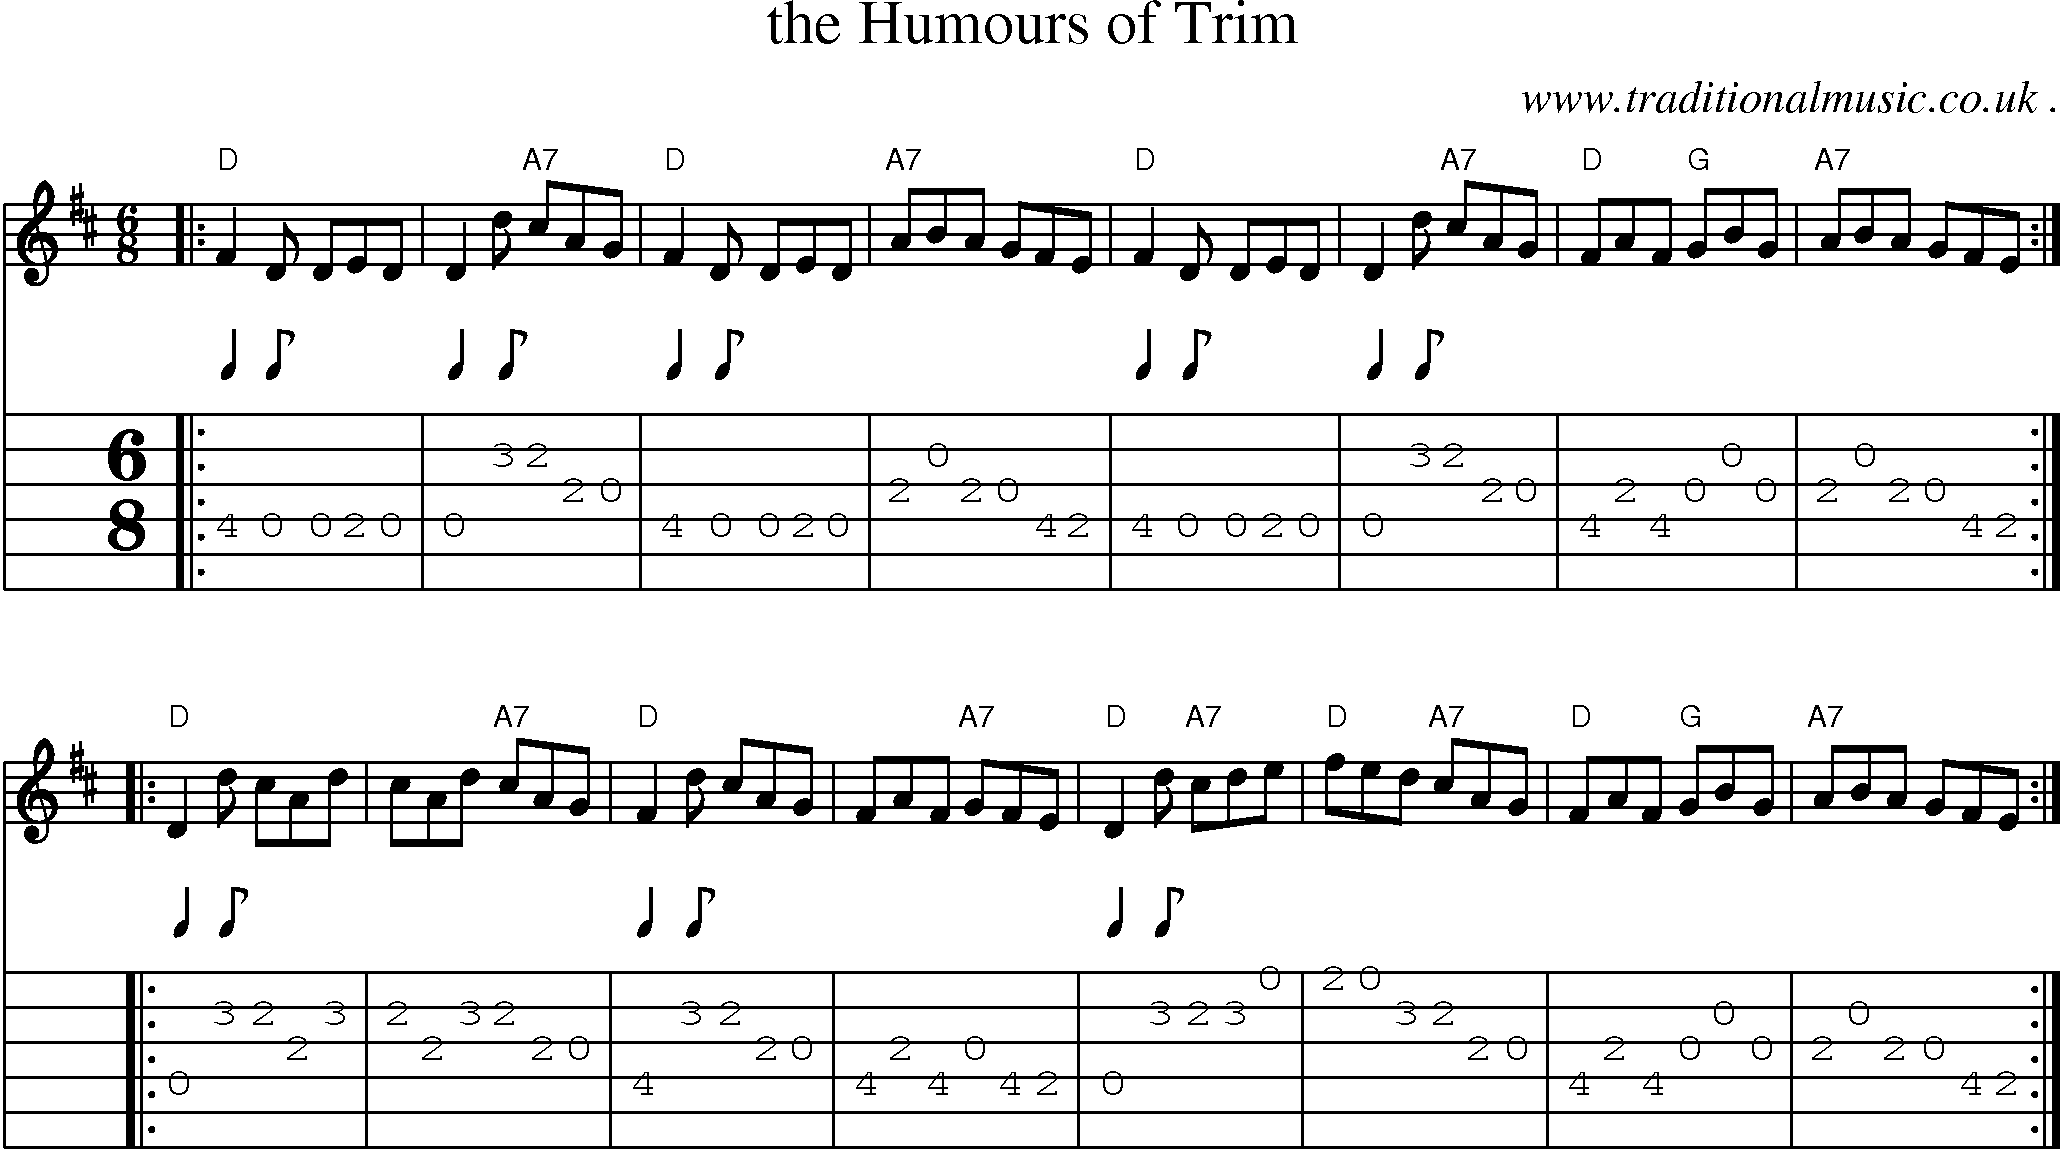 Sheet-music  score, Chords and Guitar Tabs for The Humours Of Trim